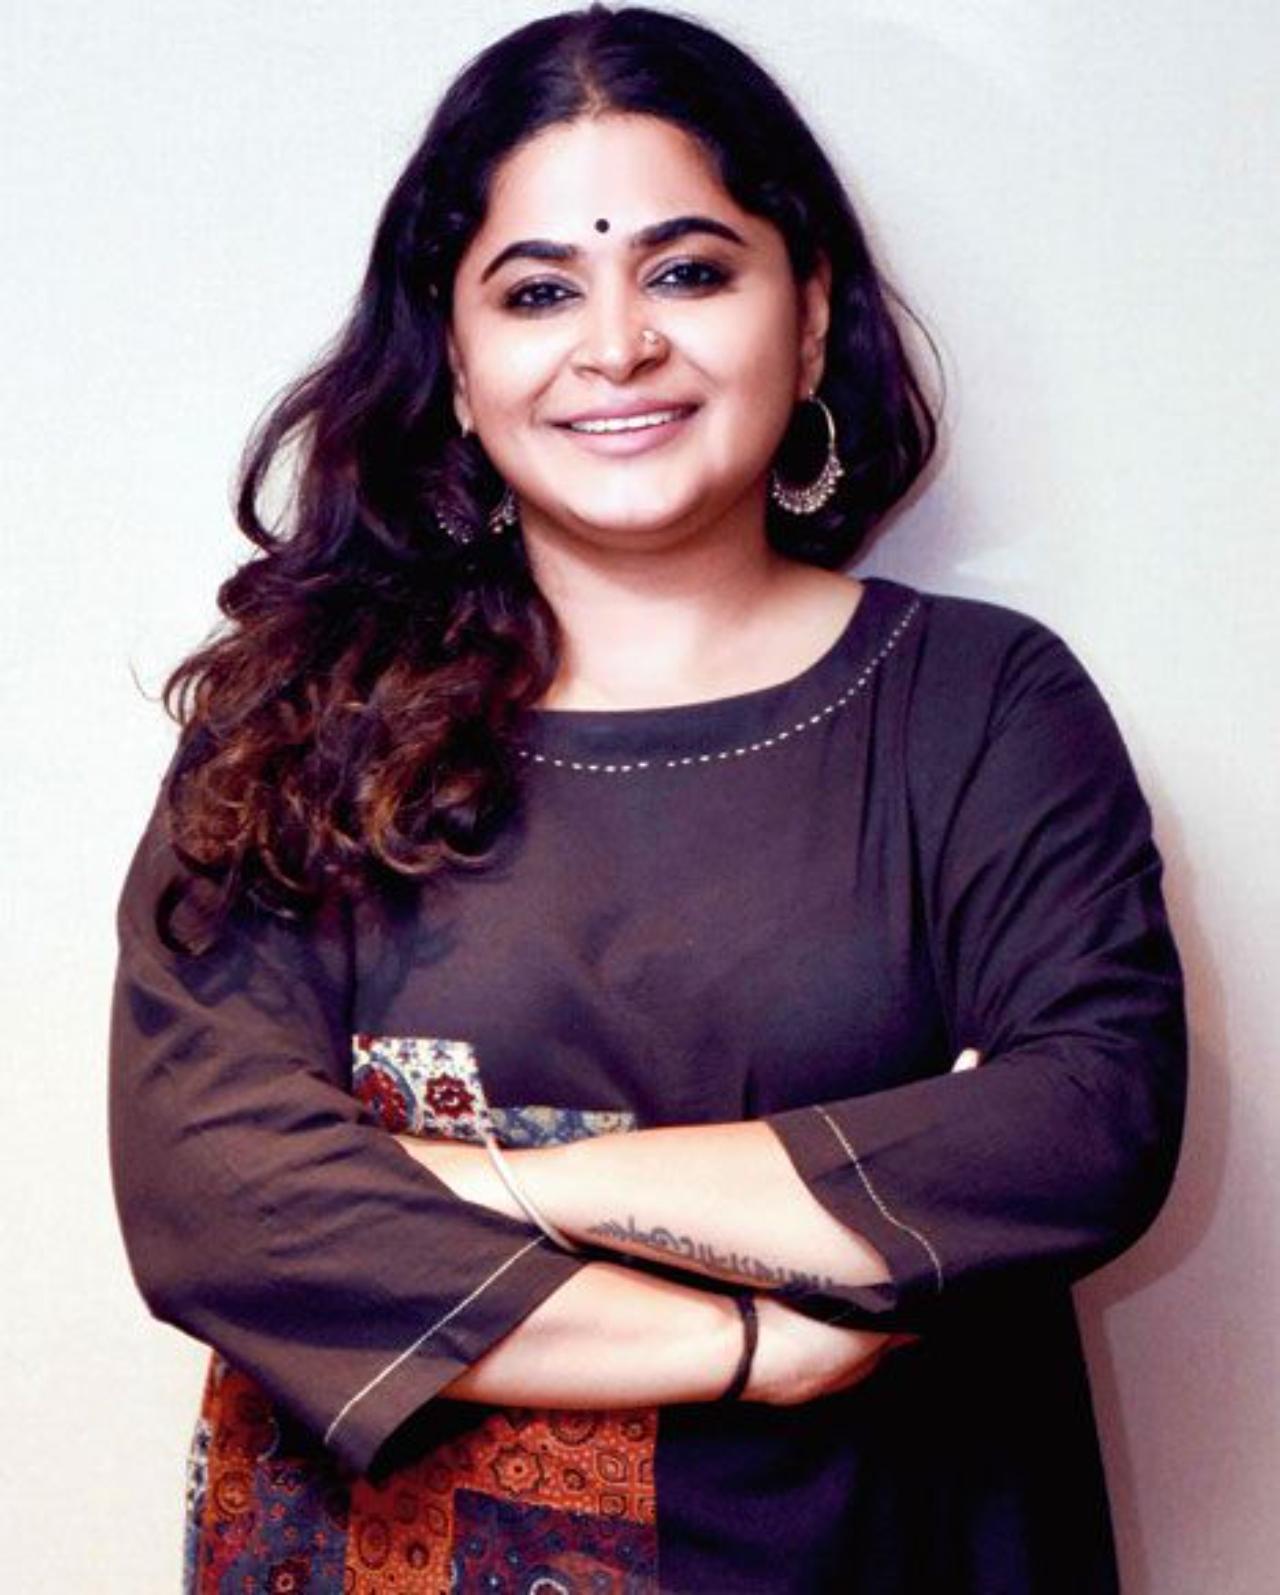 Ashwiny Iyer Tiwari is a talented filmmaker and writer who made her directorial debut in 2016 with the comedy-drama 'Nil Battey Sannata'. Before entering the world of filmmaking, Ashwiny worked in advertising for several years. Despite having a cushy position at a prestigious firm, she left it to pursue her passion for filmmaking. Ashwiny started by taking small steps towards her goal, creating a short film called 'What's for Breakfast'. She then went on to make 'Nil Battey Sannata', which was her first Bollywood film. The film received critical acclaim and earned her the Best Debut Director award at the Filmfare Awards. Ashwiny is known for her ability to create unique and well-defined characters, particularly those from India's heartlands with lifestyles that are not all glitter and glamor. She has a knack for exploring the subtleties of relationships and bonding in a natural context and has received praise for her delicate handling of tough topics. In addition to her work in film, Ashwiny has also written her debut fiction work, 'Mapping Love'.